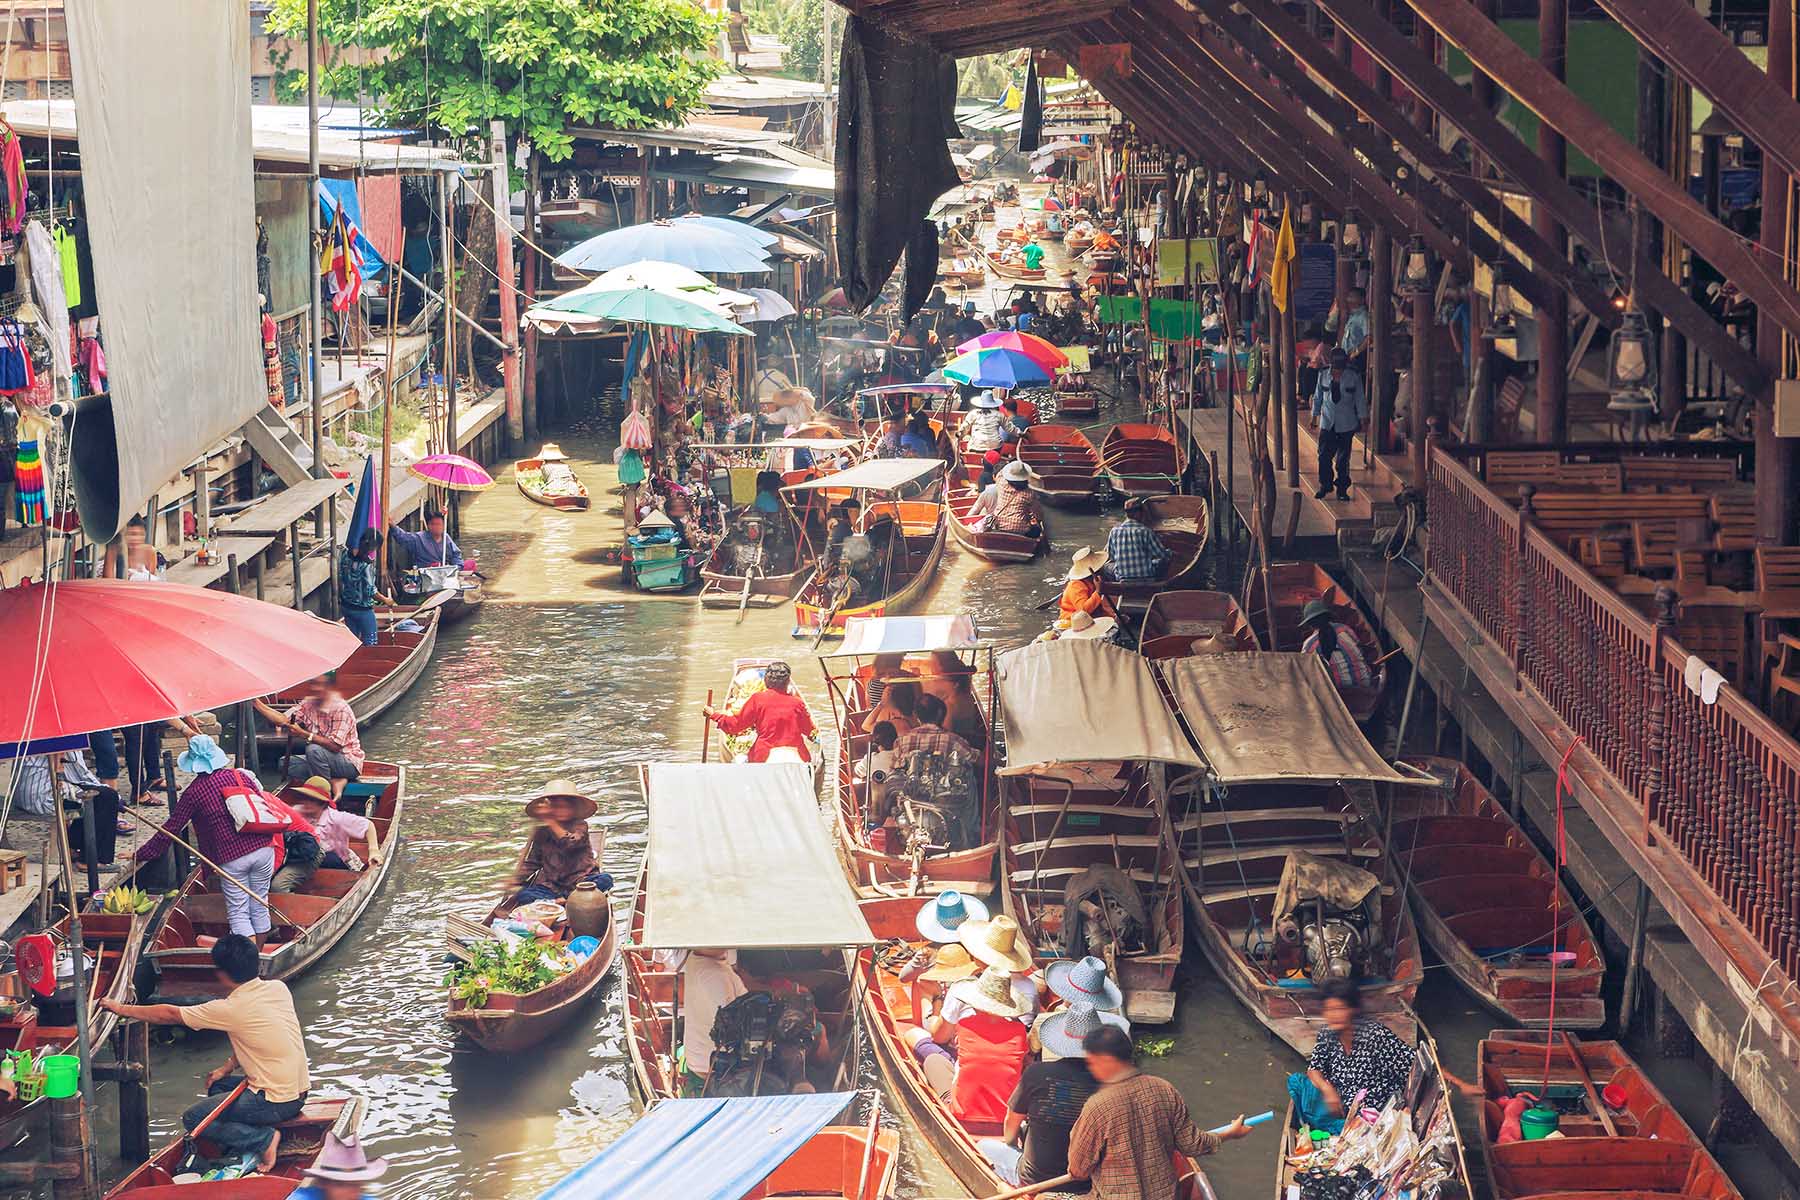 Loads of people visiting and traveling through a floating market in Bangkok, Thailand.